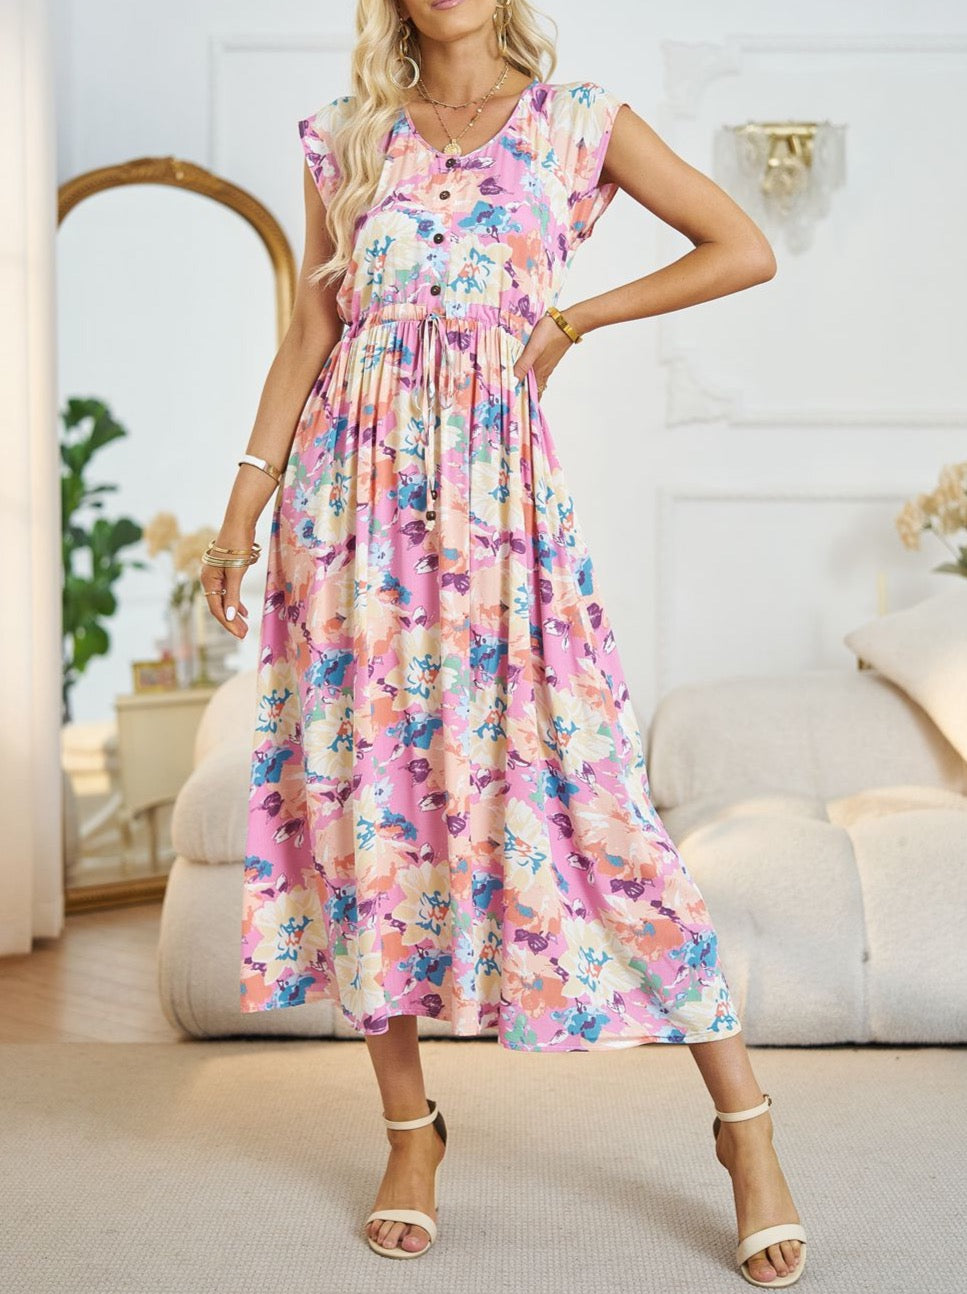 Free for Brunch Floral Midi Dress - Cheeky Chic Boutique